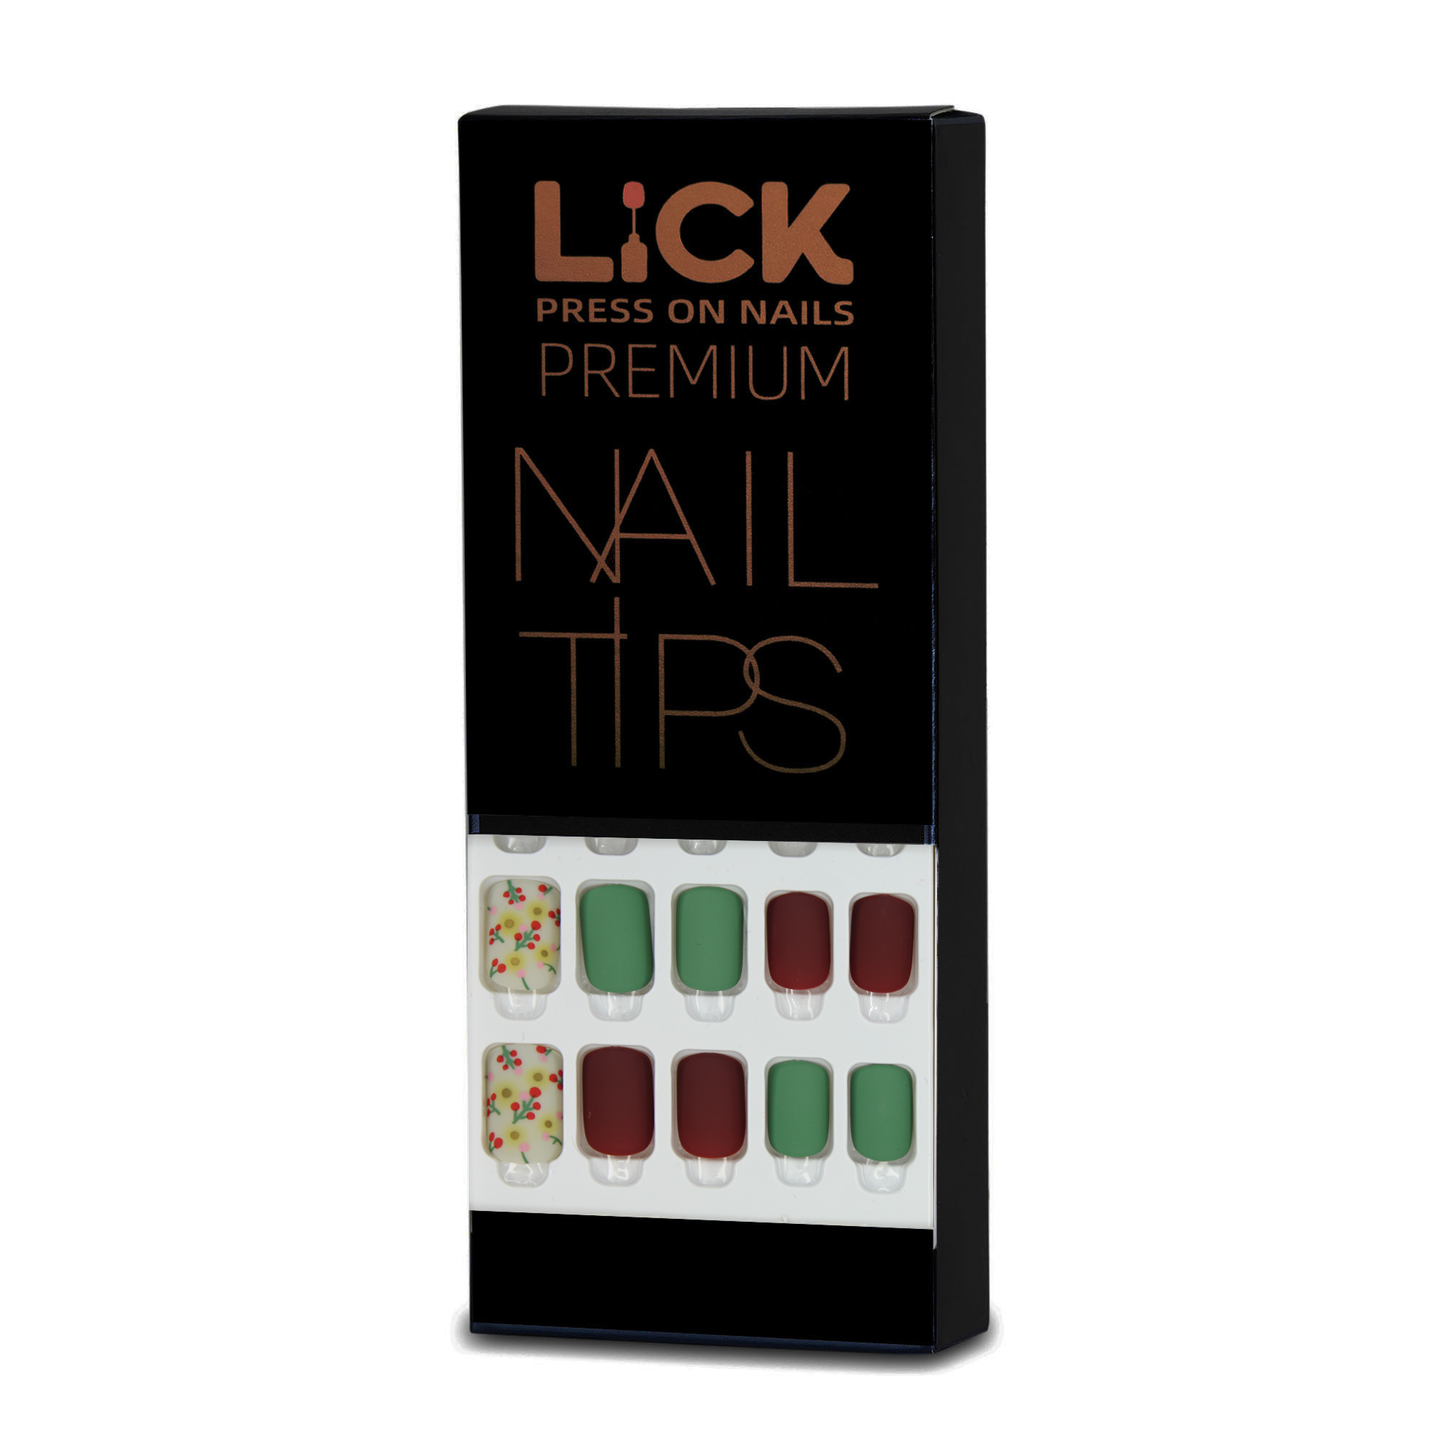 LICK NAILS Emerald Green With Floral Design Press on Nails